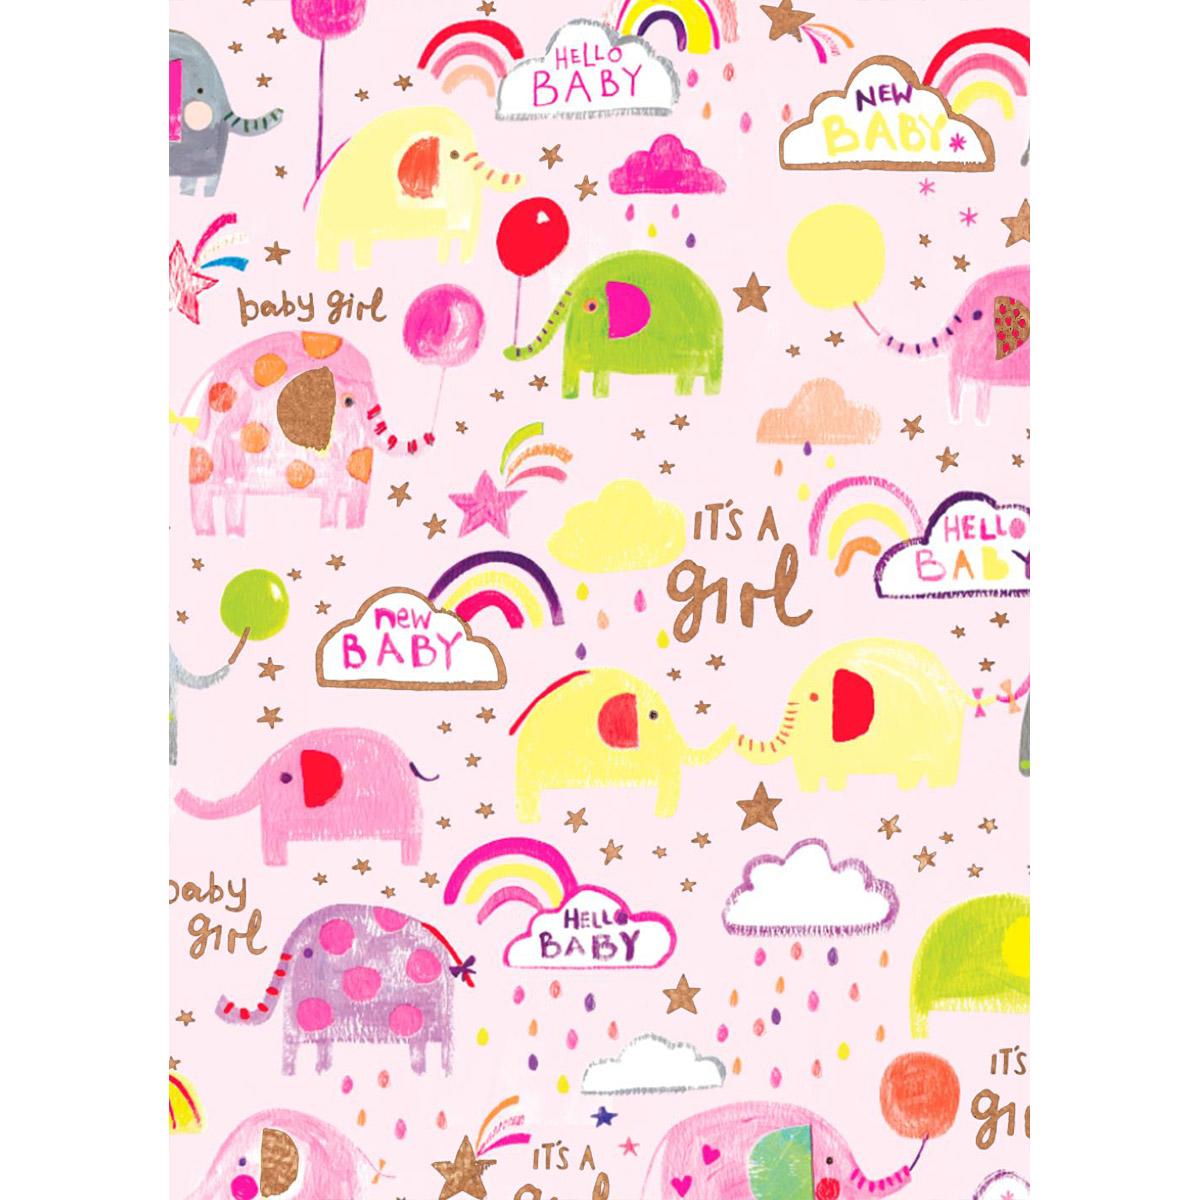 Luxury Giftwrap Sheet By Glick - Pink Baby Girl Image